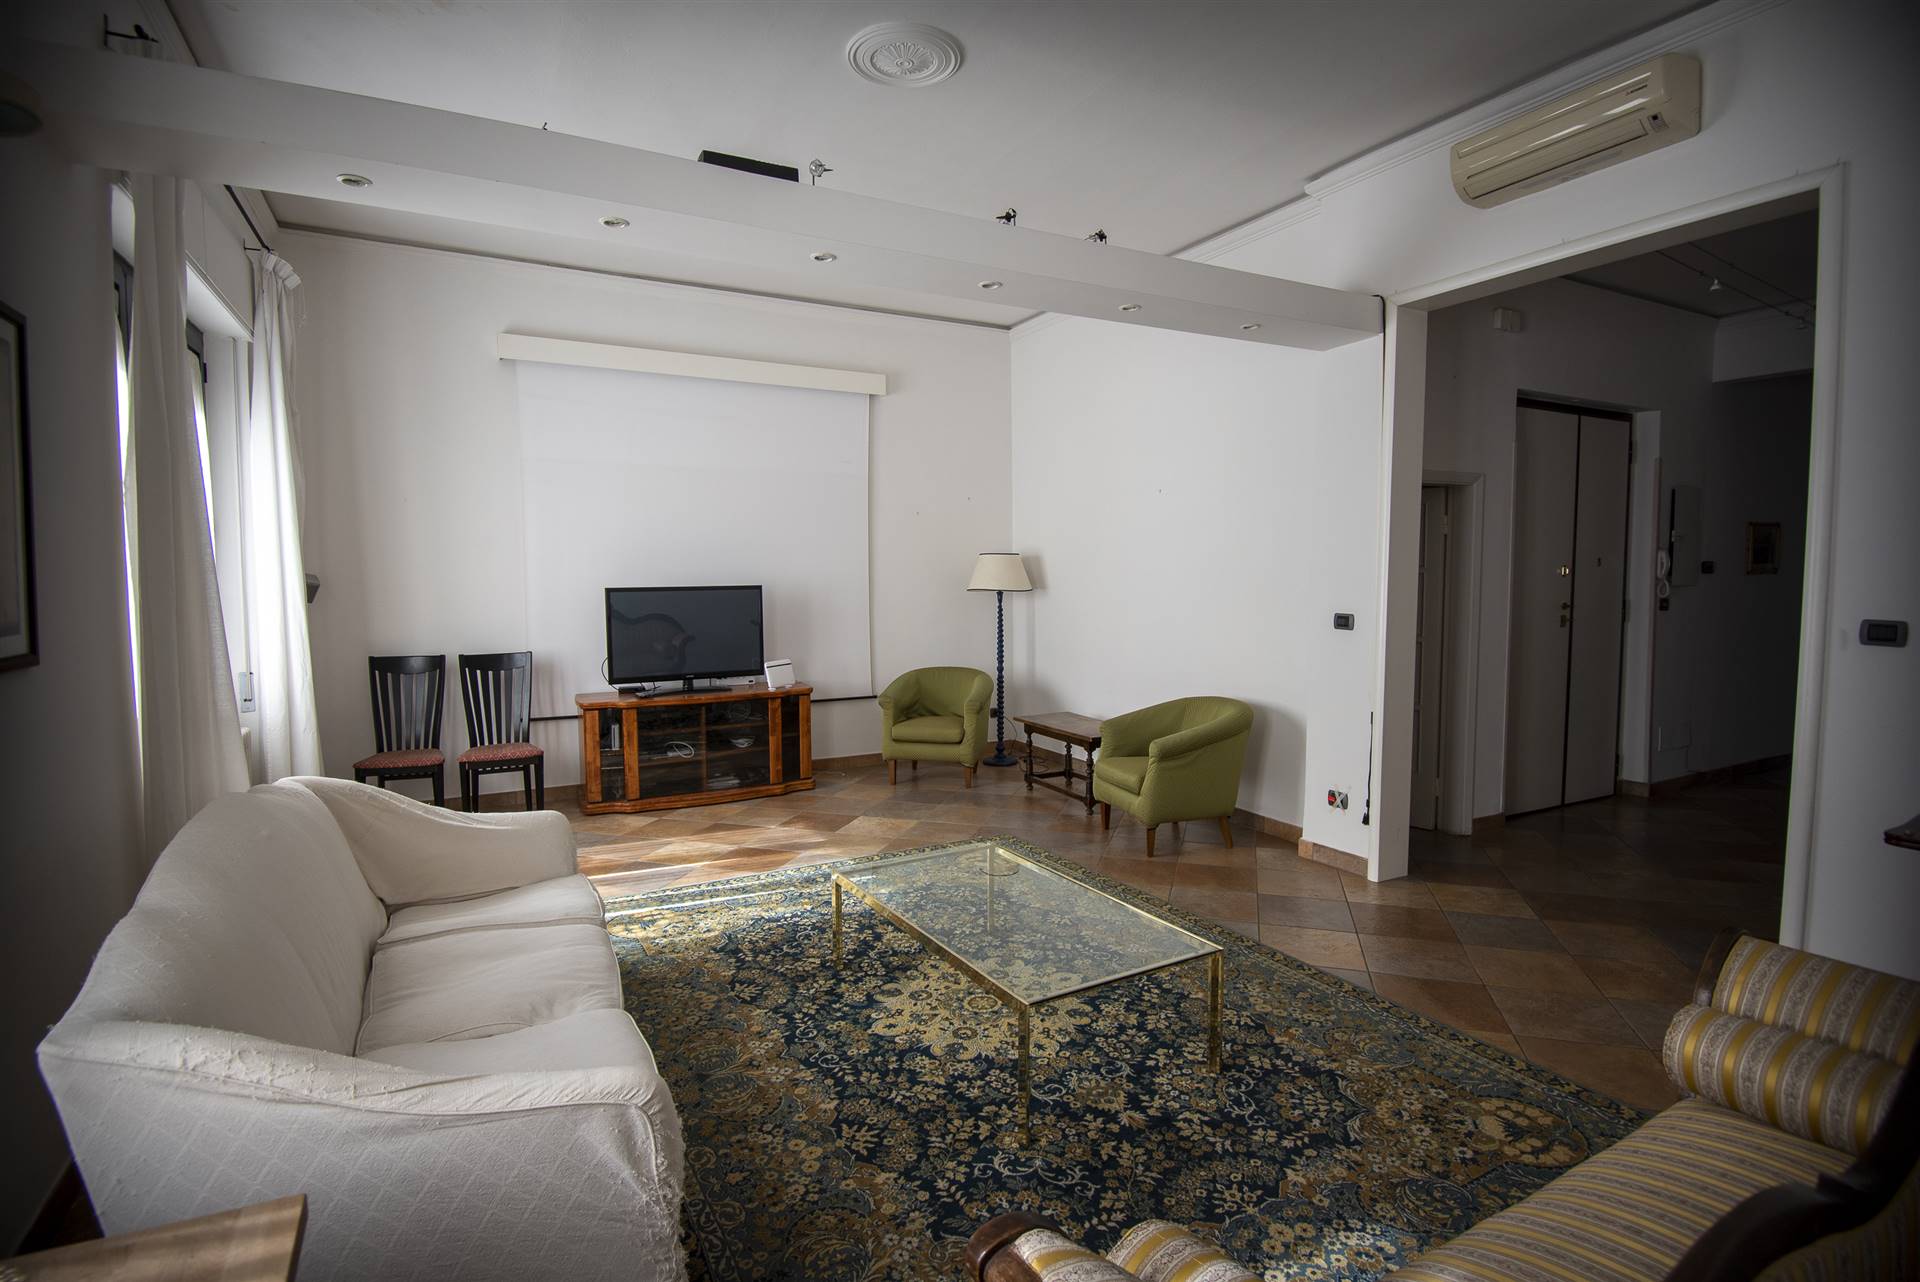 PIAZZA DONATELLO, FIRENZE, Apartment for sale of 207 Sq. mt., Good condition, Heating Individual heating system, Energetic class: F, Epi: 98,6 kwh/m2 